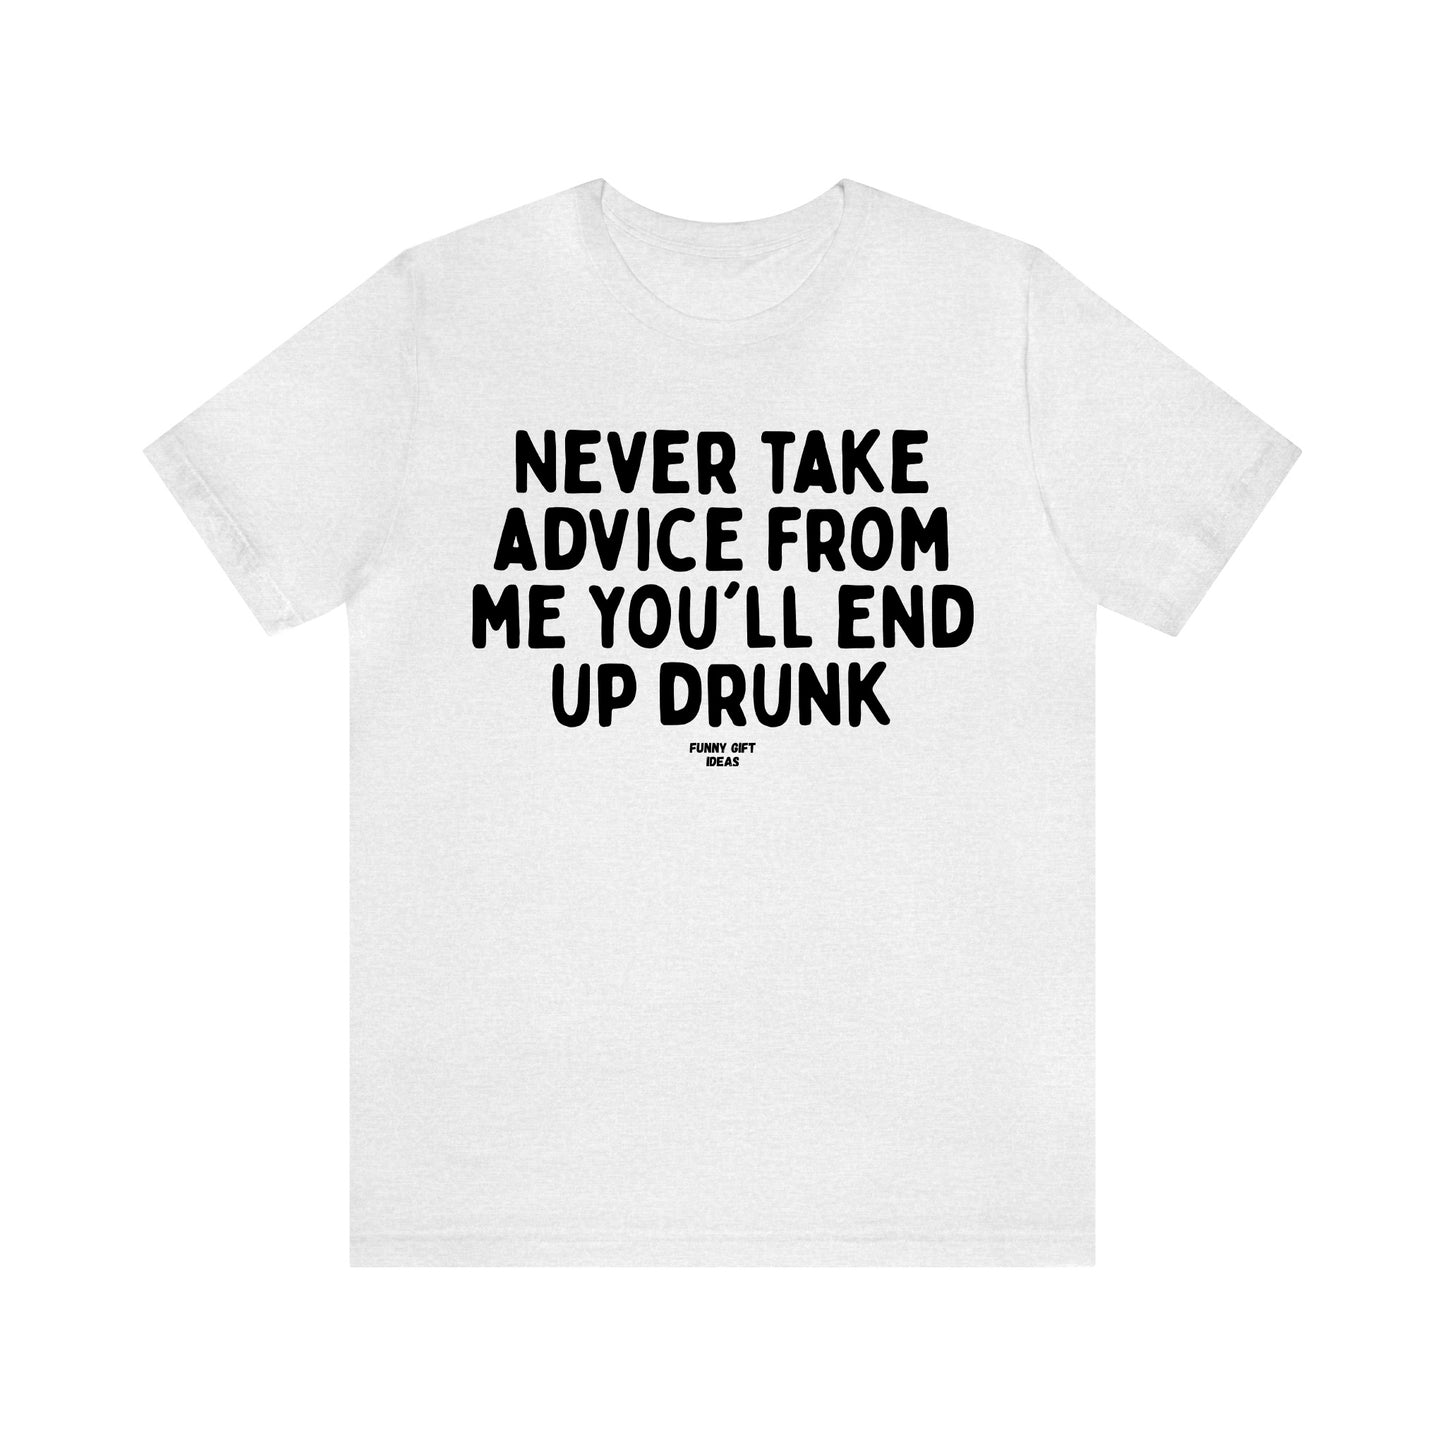 Funny Shirts for Women - Never Take Advice From Me You'll End Up Drunk - Women's T Shirts